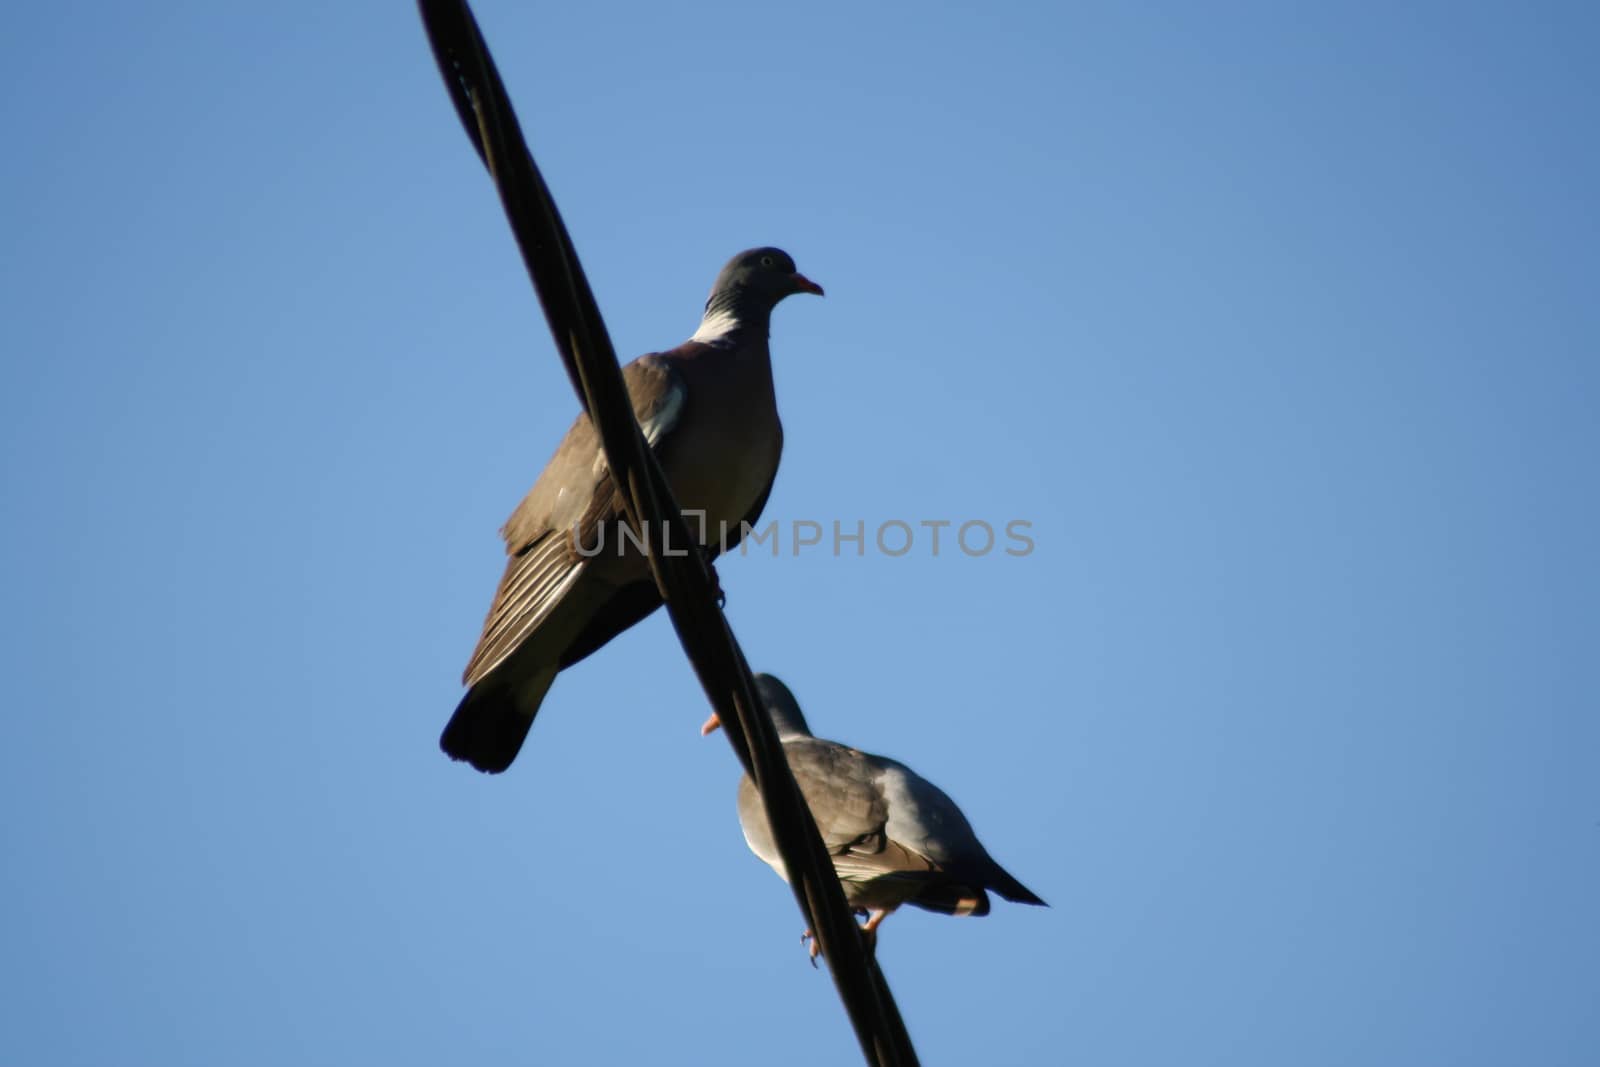 A bird perched on top of a pole. High quality photo